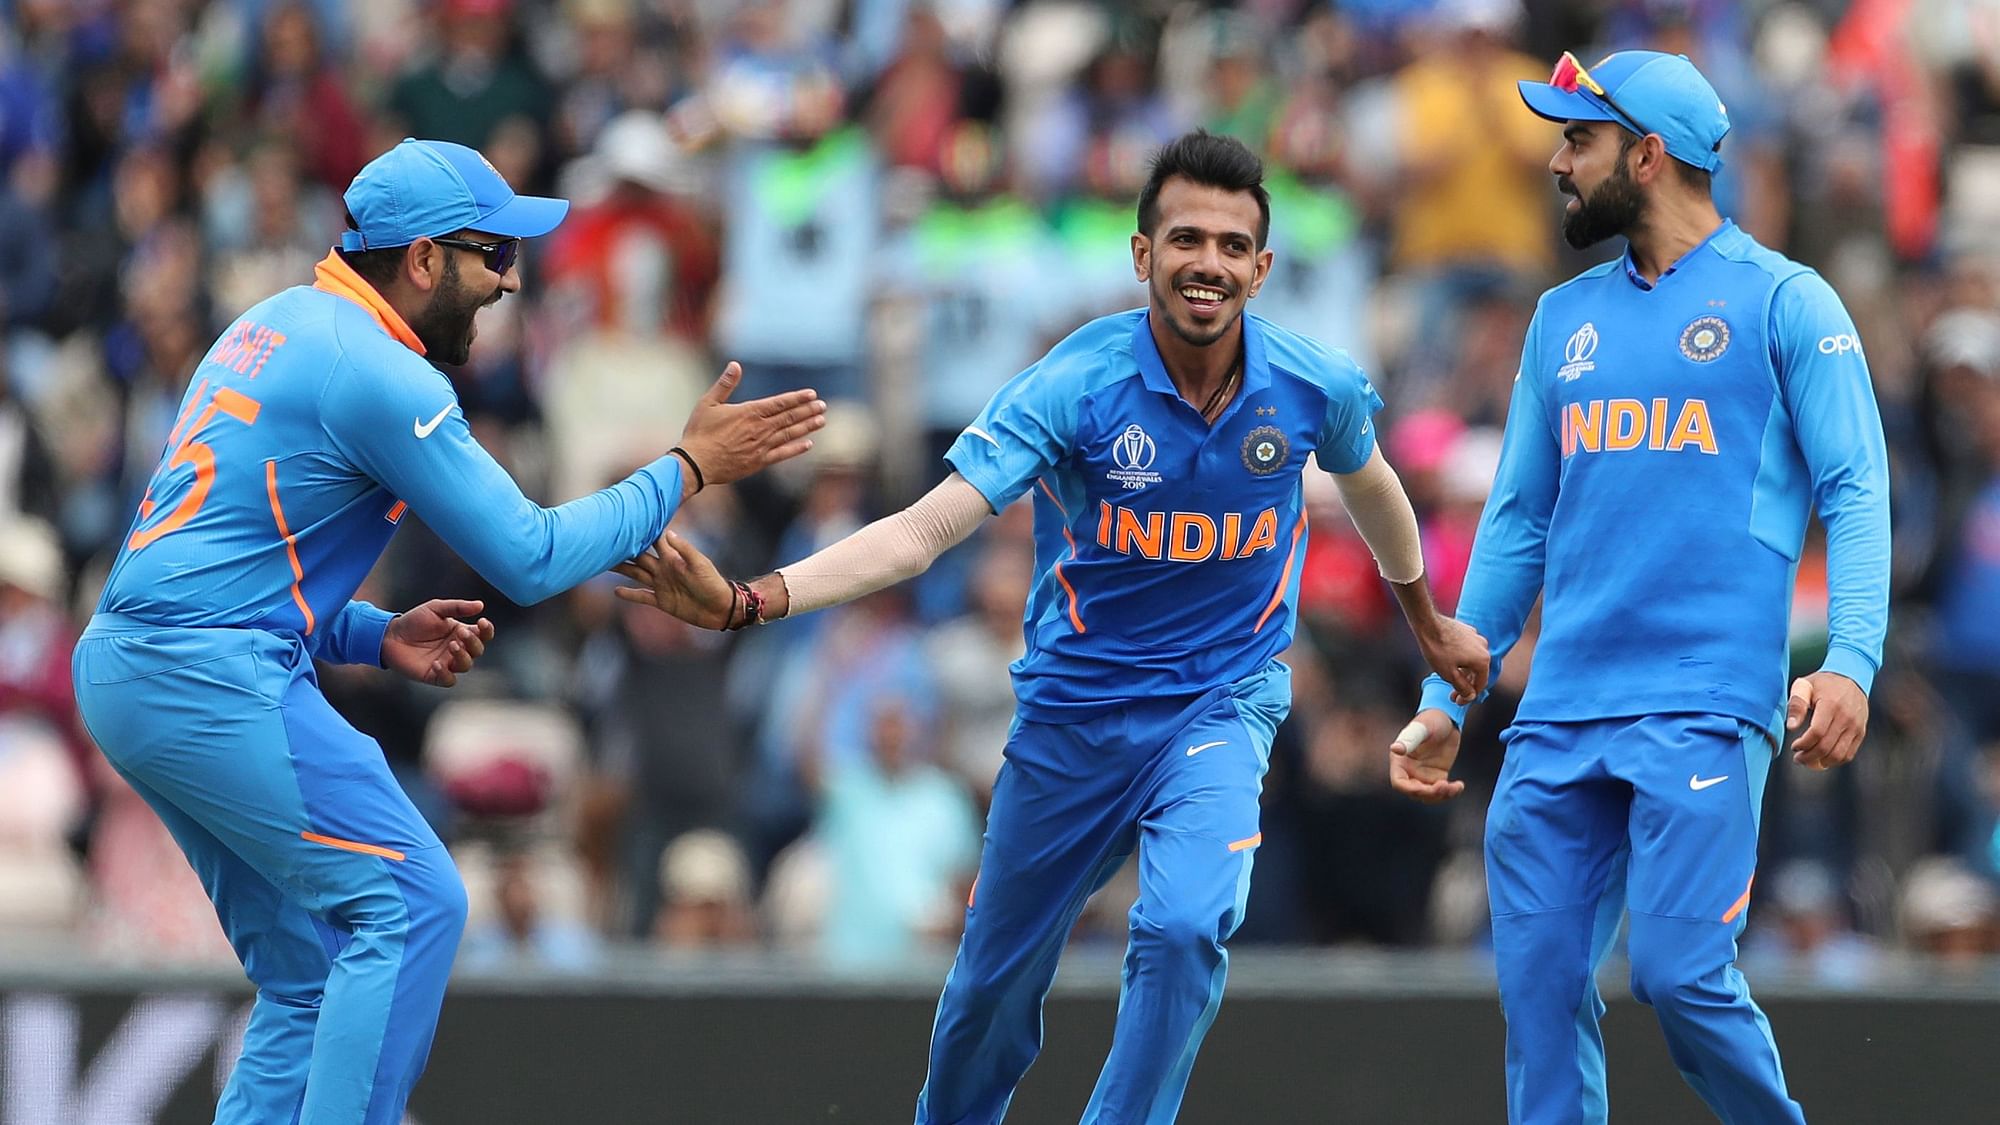 Ind vs Sa World Cup 2019: India started their World Cup campaign in style pulling off a six-wicket victory against South Africa.